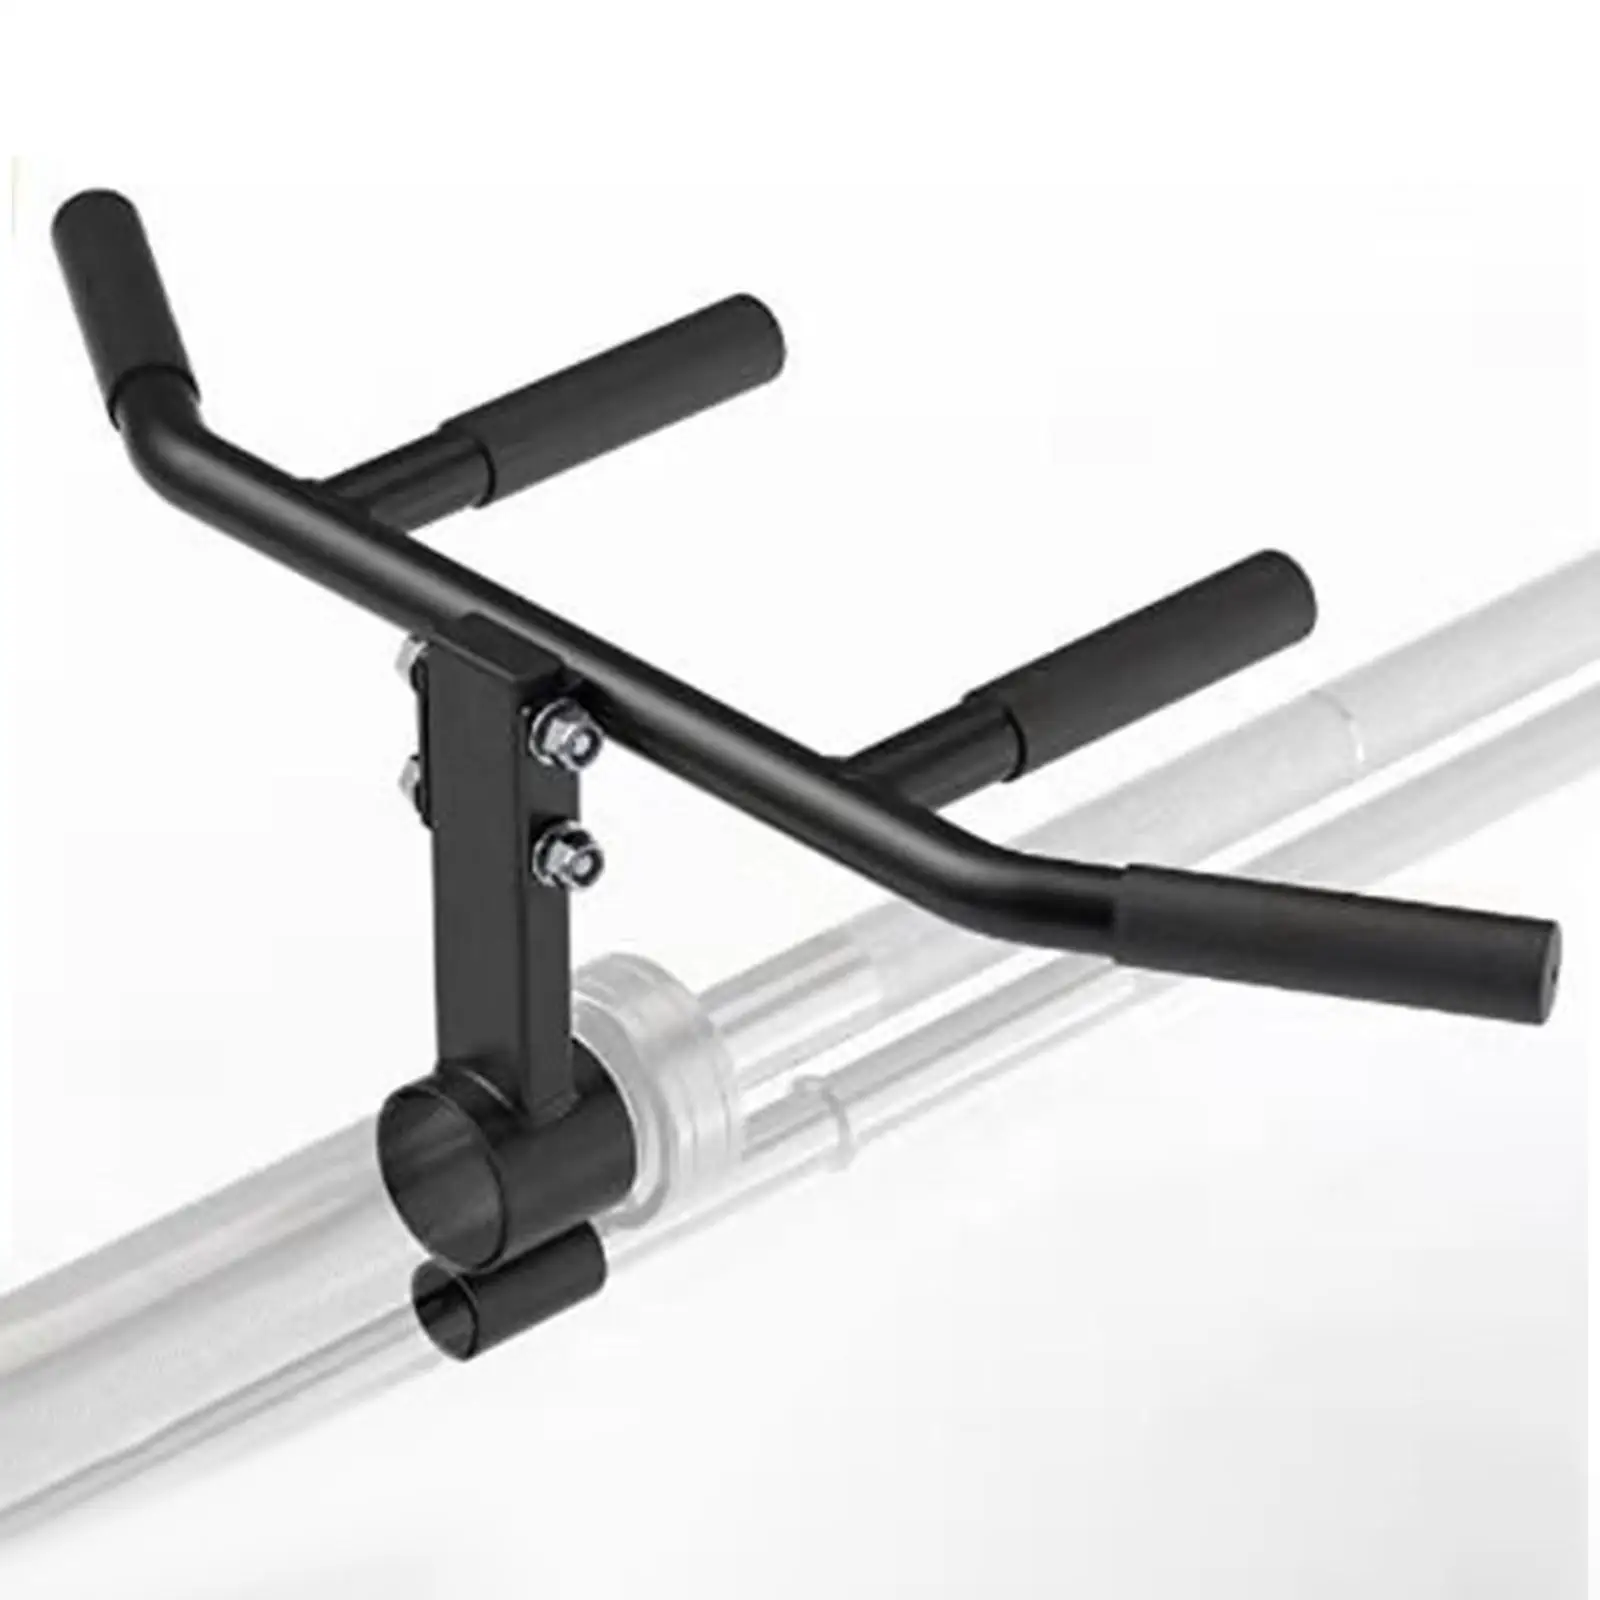 Bar Row Platform Barbell Attachment Easy to Install Landmine Barbell Handle for Exercises